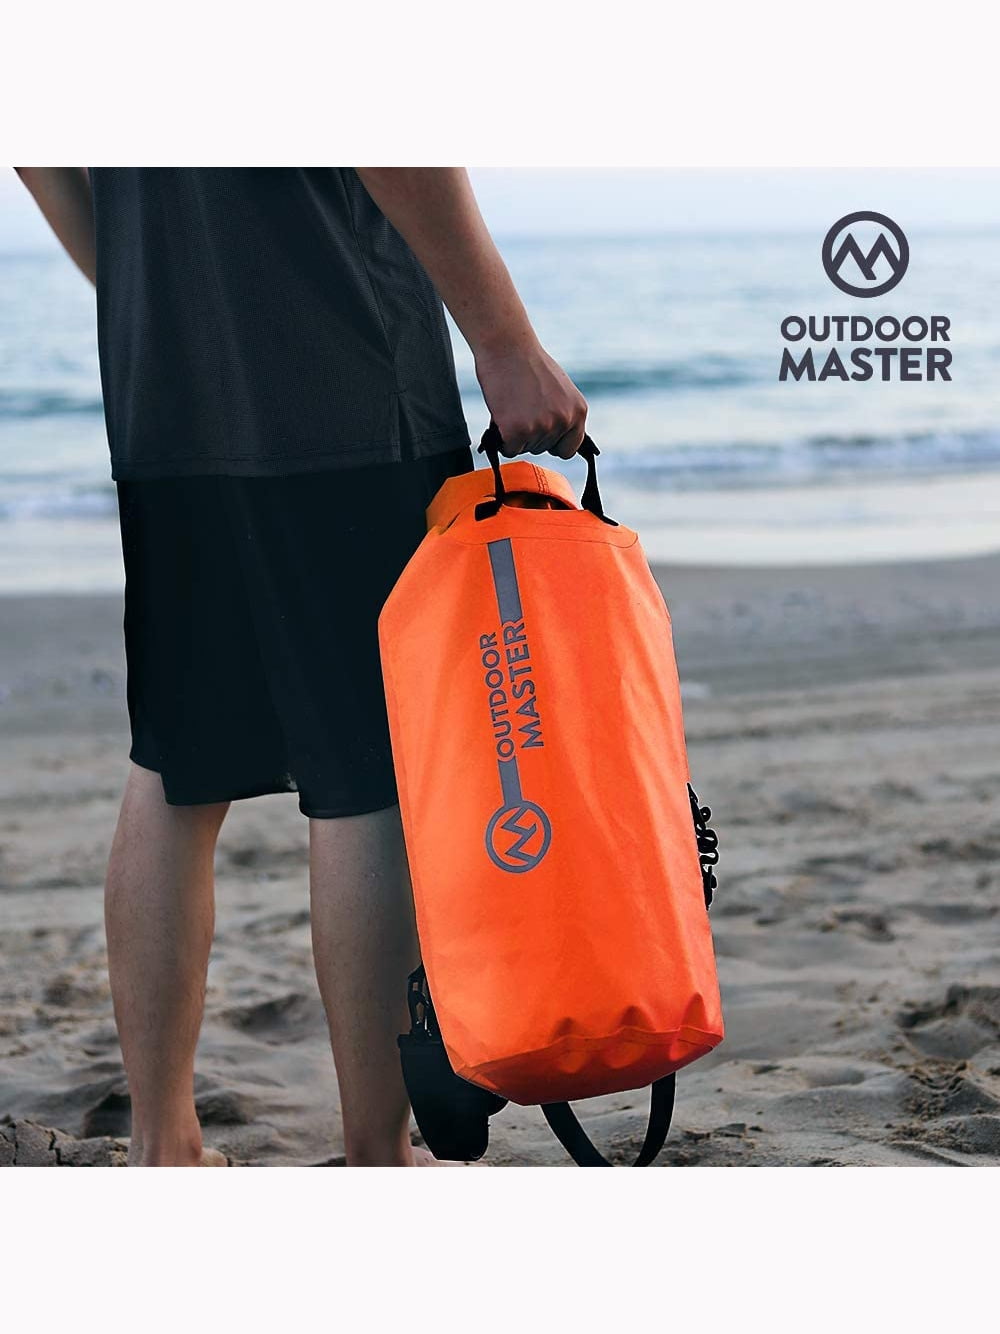 Yellow OutdoorMaster Dry Bag Seal Waterproof Floating Roll Top Dry Sack 10 L 